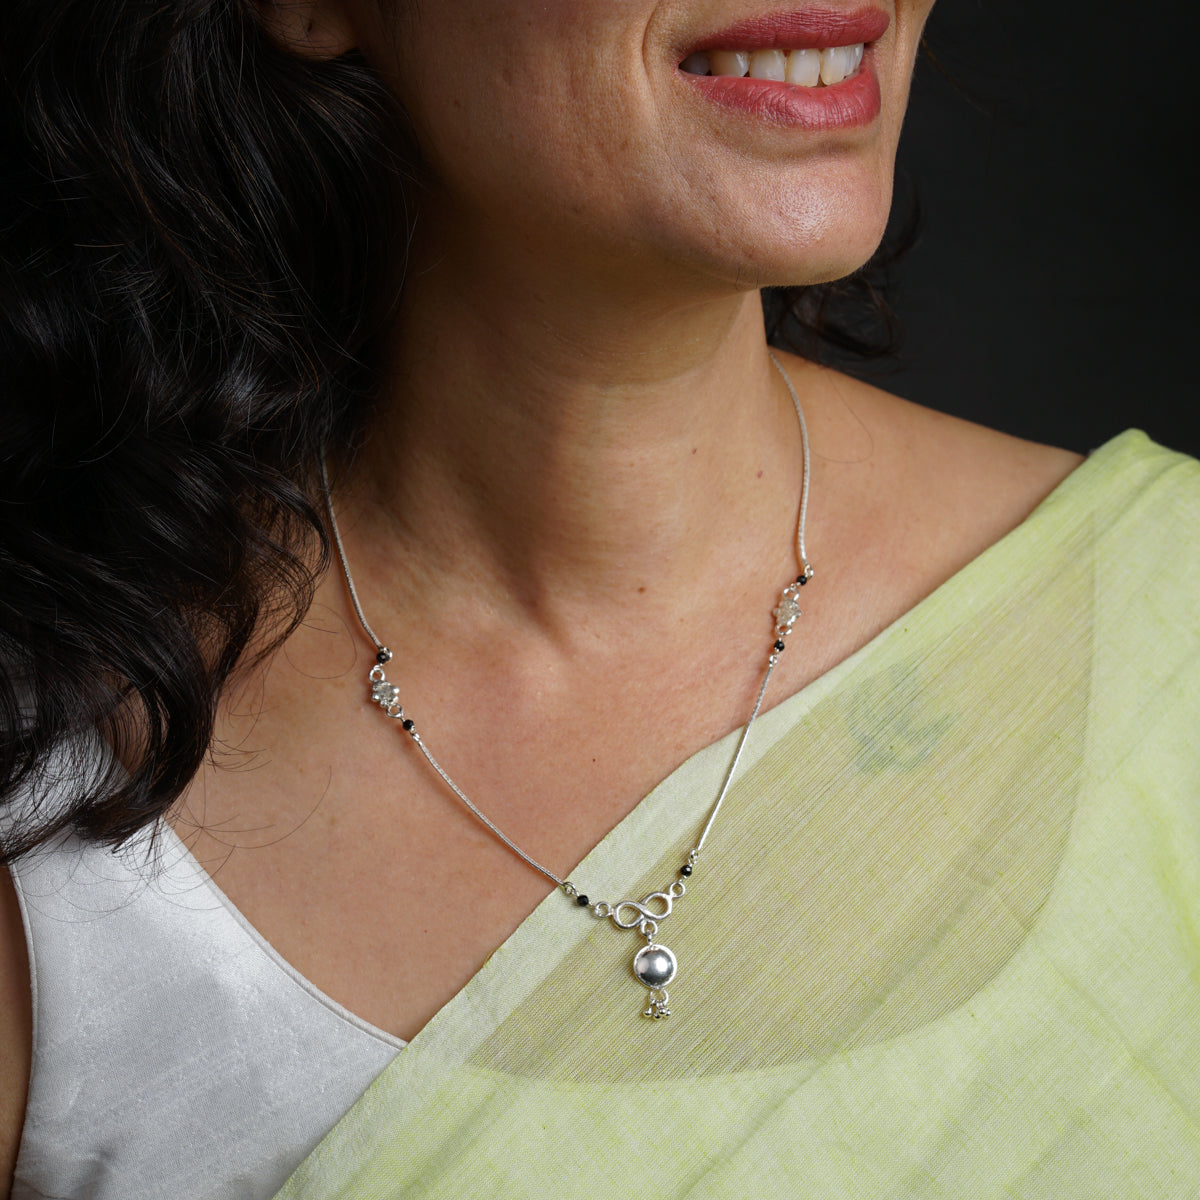 a woman wearing a necklace with a diamond on it